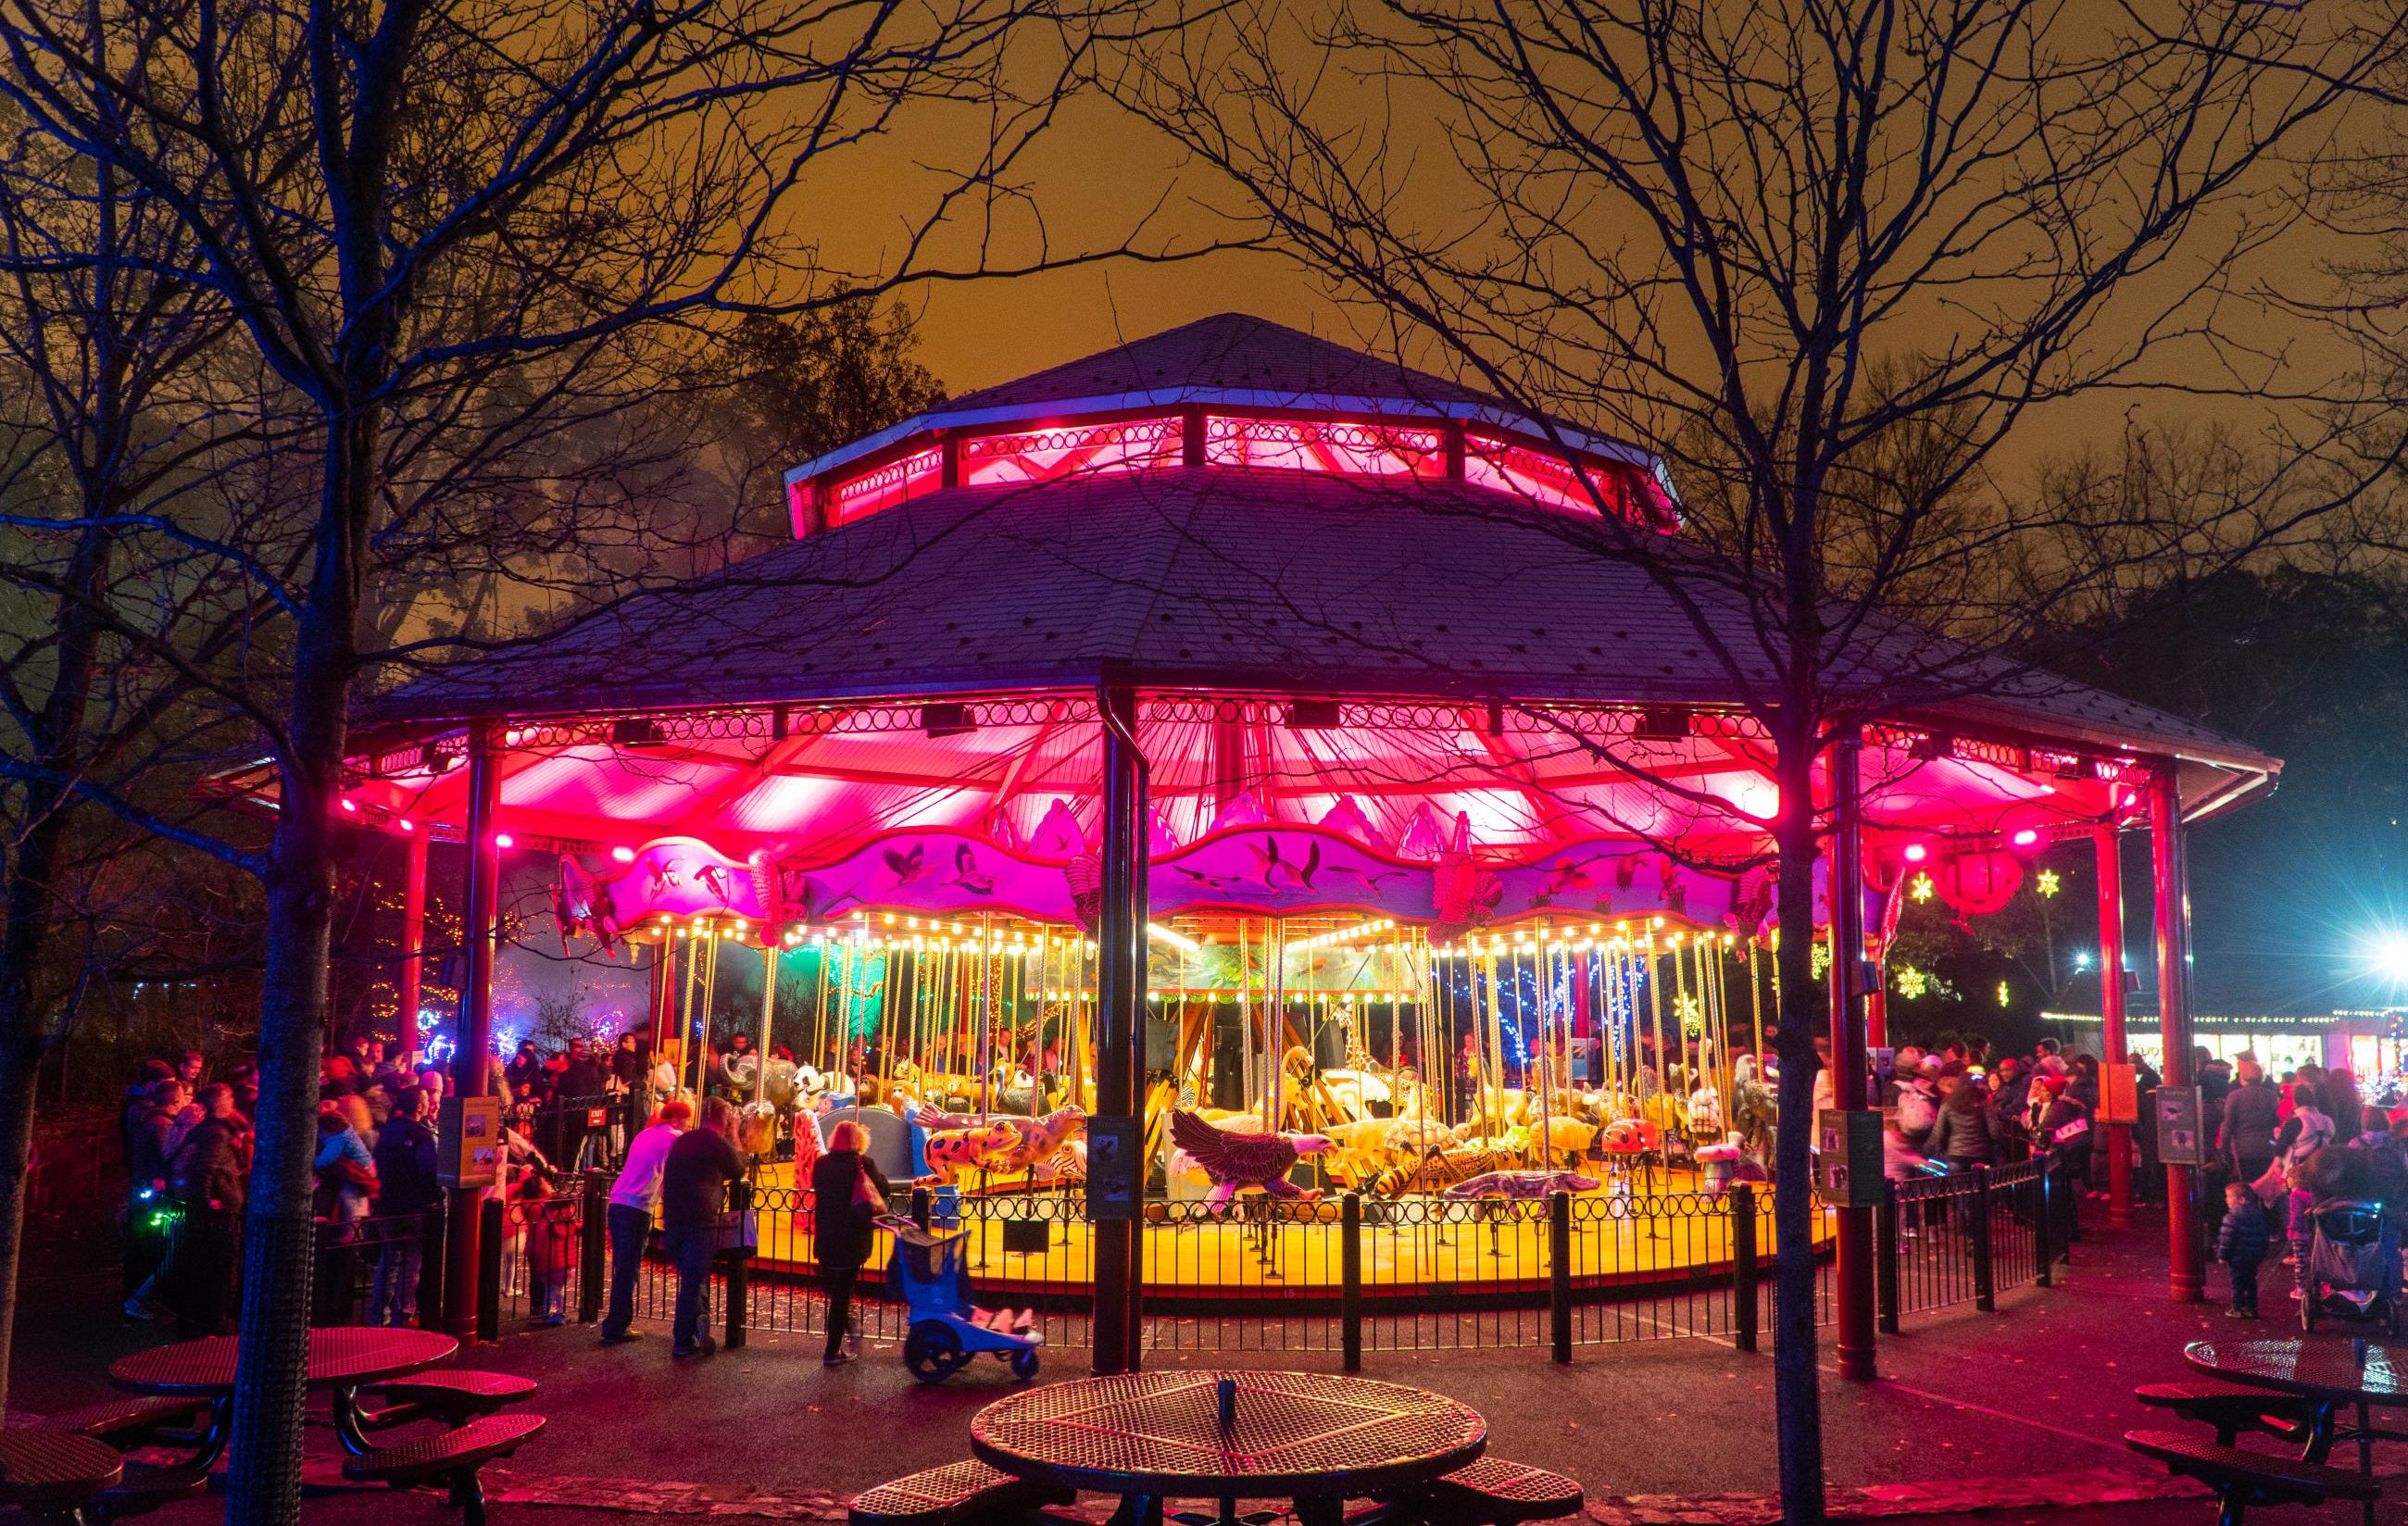 Carousel at the Zoo lit up with glowing holiday string lights.